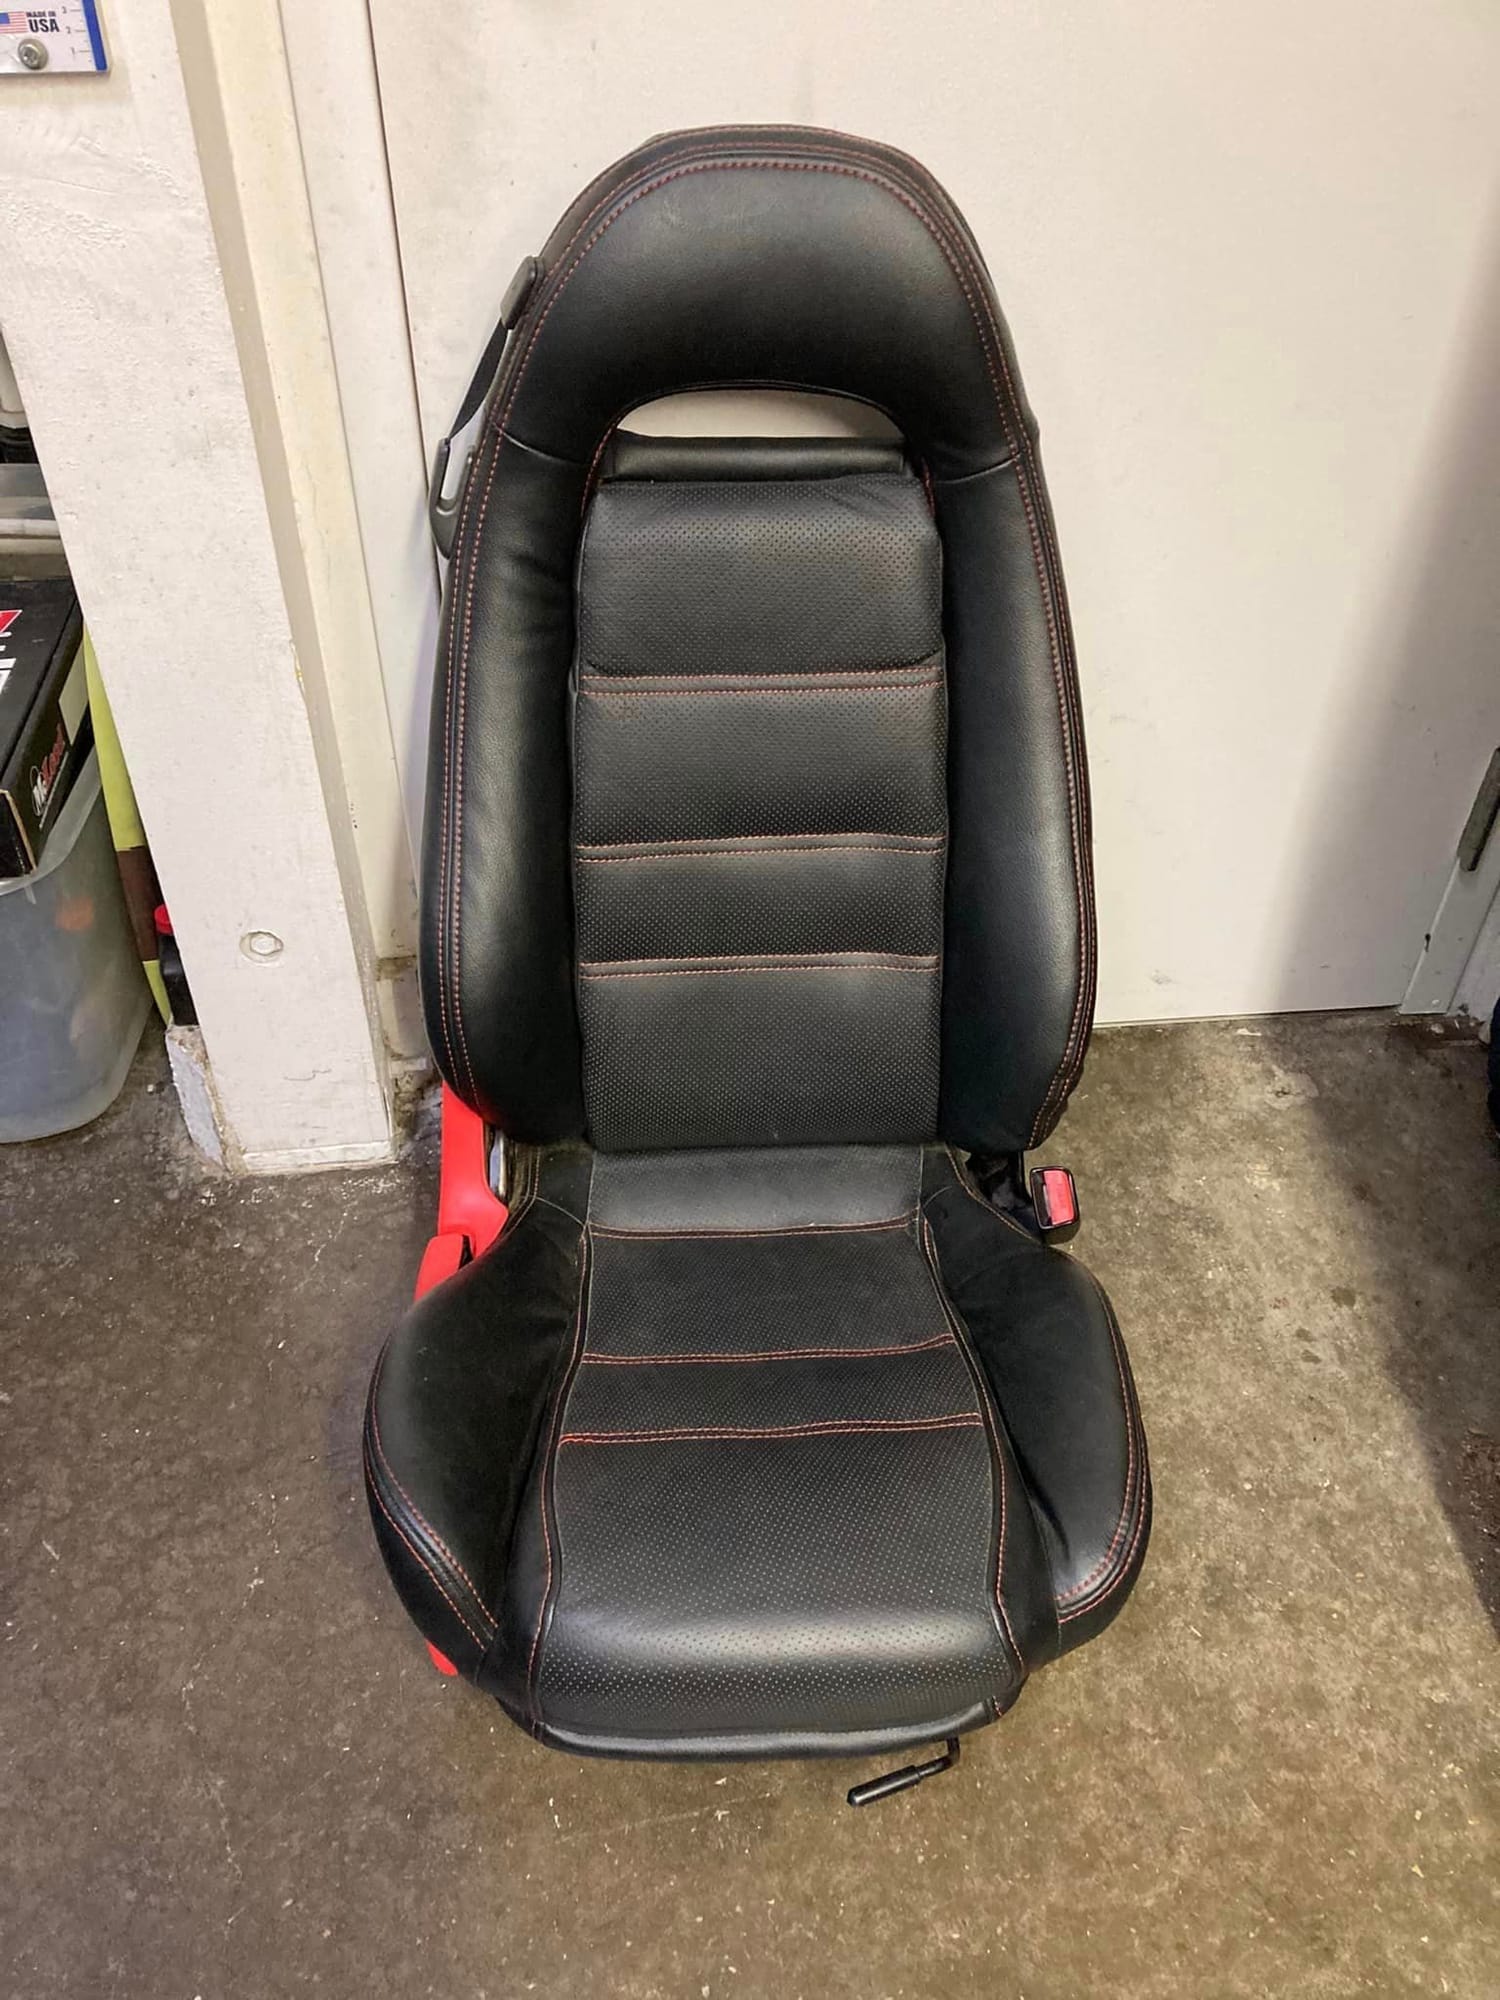 Interior/Upholstery - FD black seats recovered in black leather.... red stitching!  Very nice condition! - Used - San Ramon, CA 94583, United States